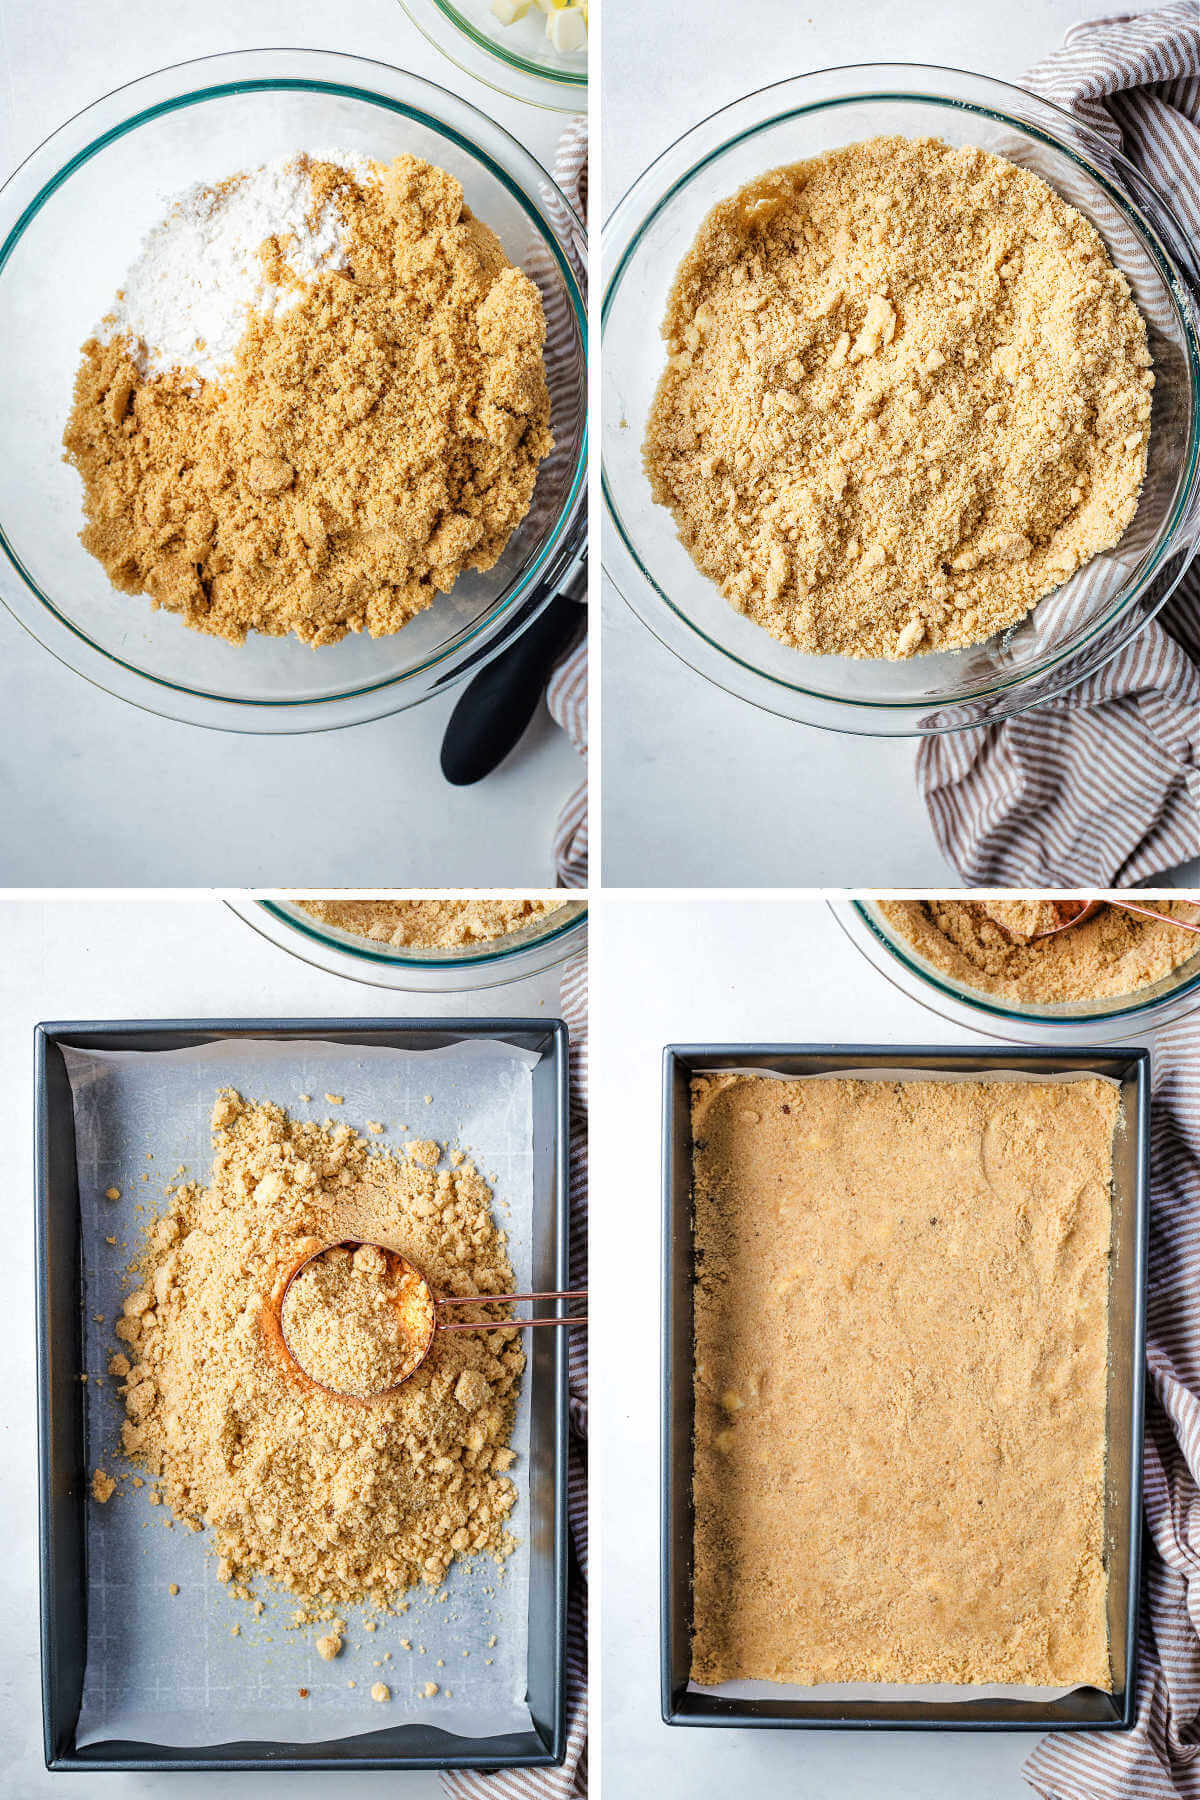 steps for making a brown sugar crust for a coffee cake and pressing it into a baking pan.